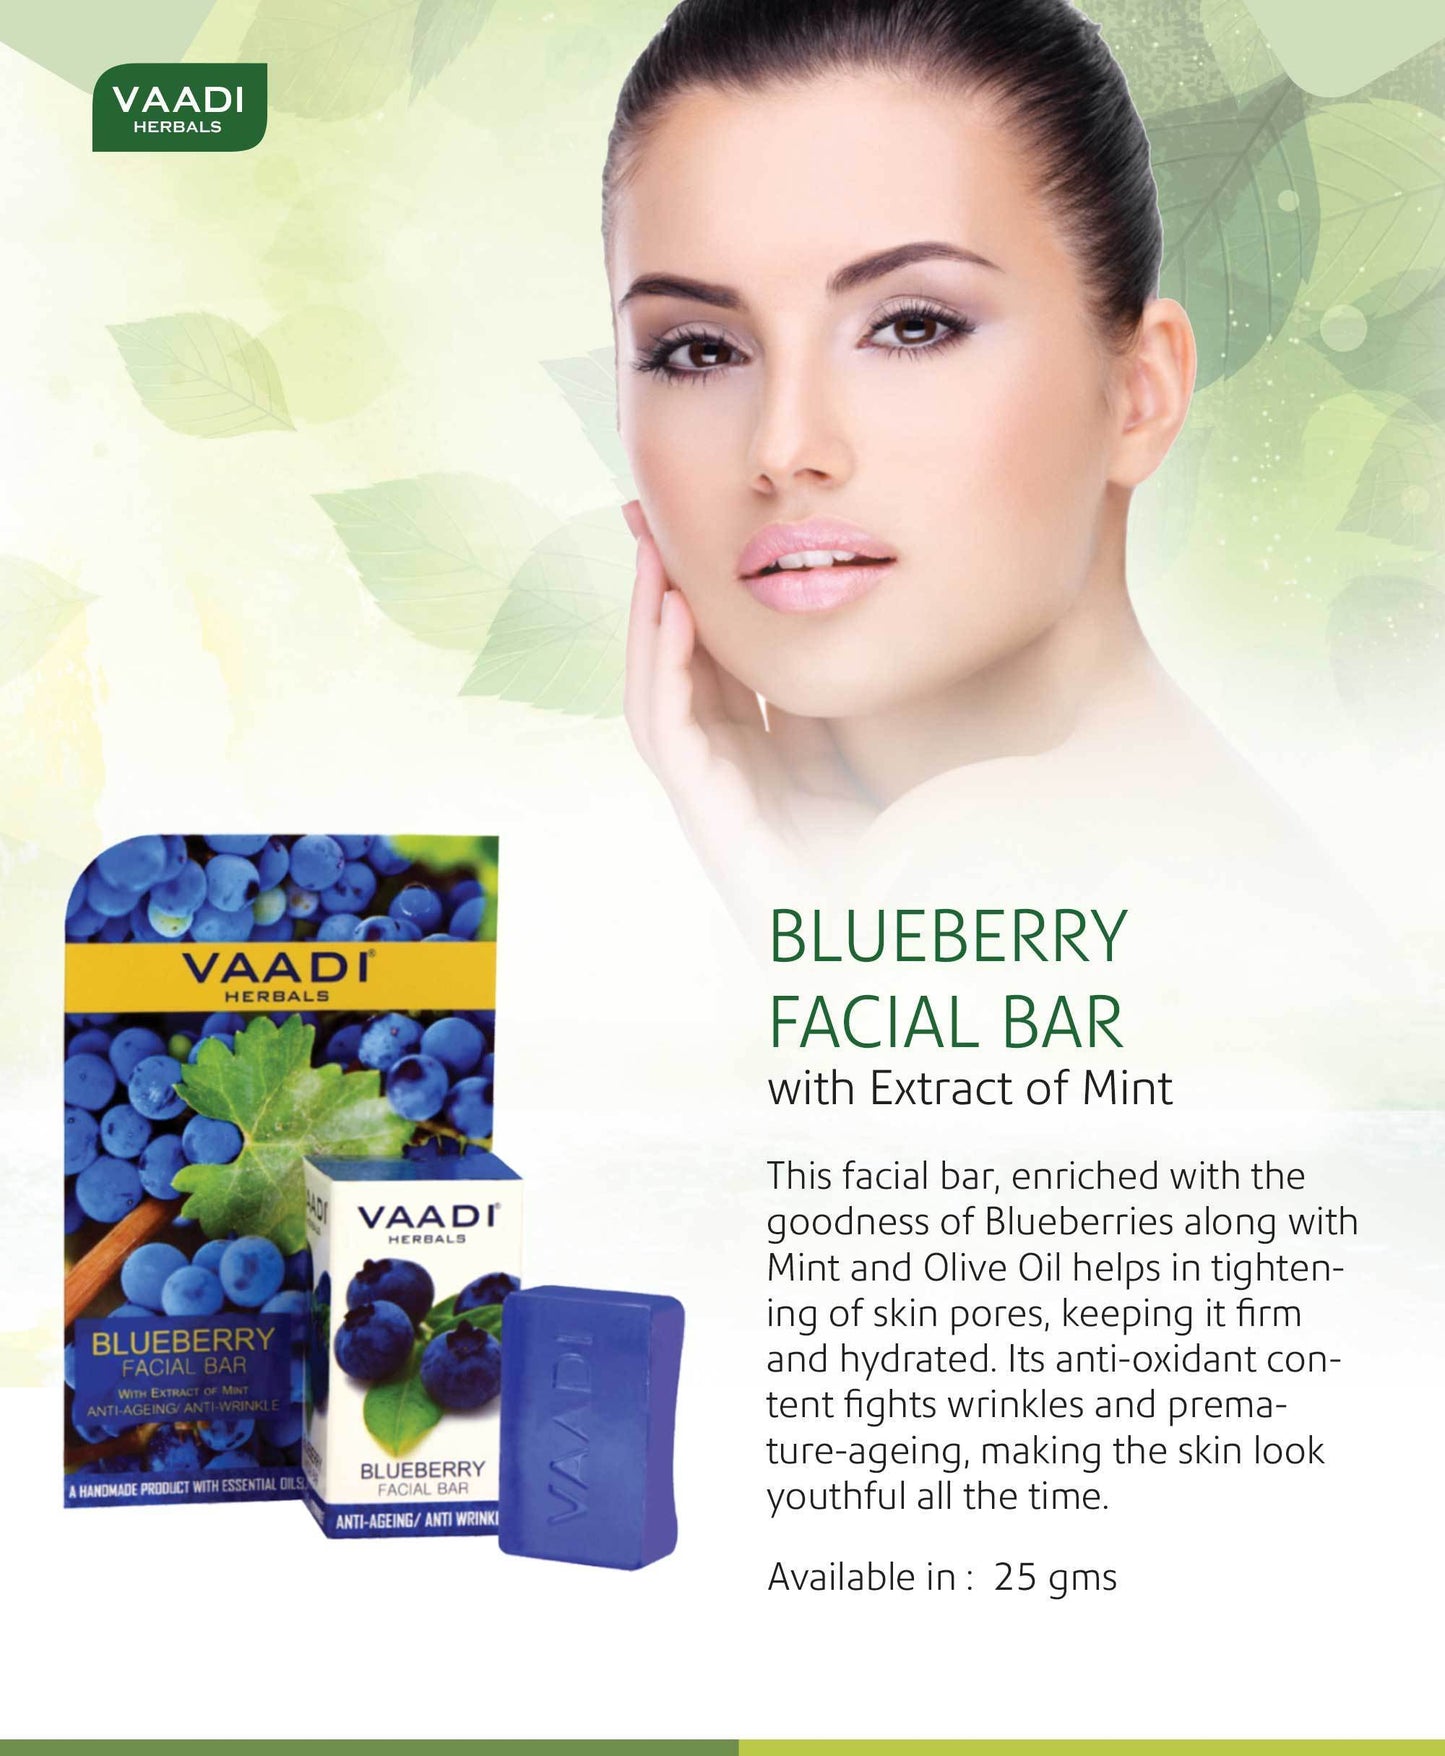 Organic Blueberry Facial Bar with Mint Extract & Olive Oil - Prevents Wrinkles - Makes Skin Youthful (4 x 25 gms/0.9 oz)